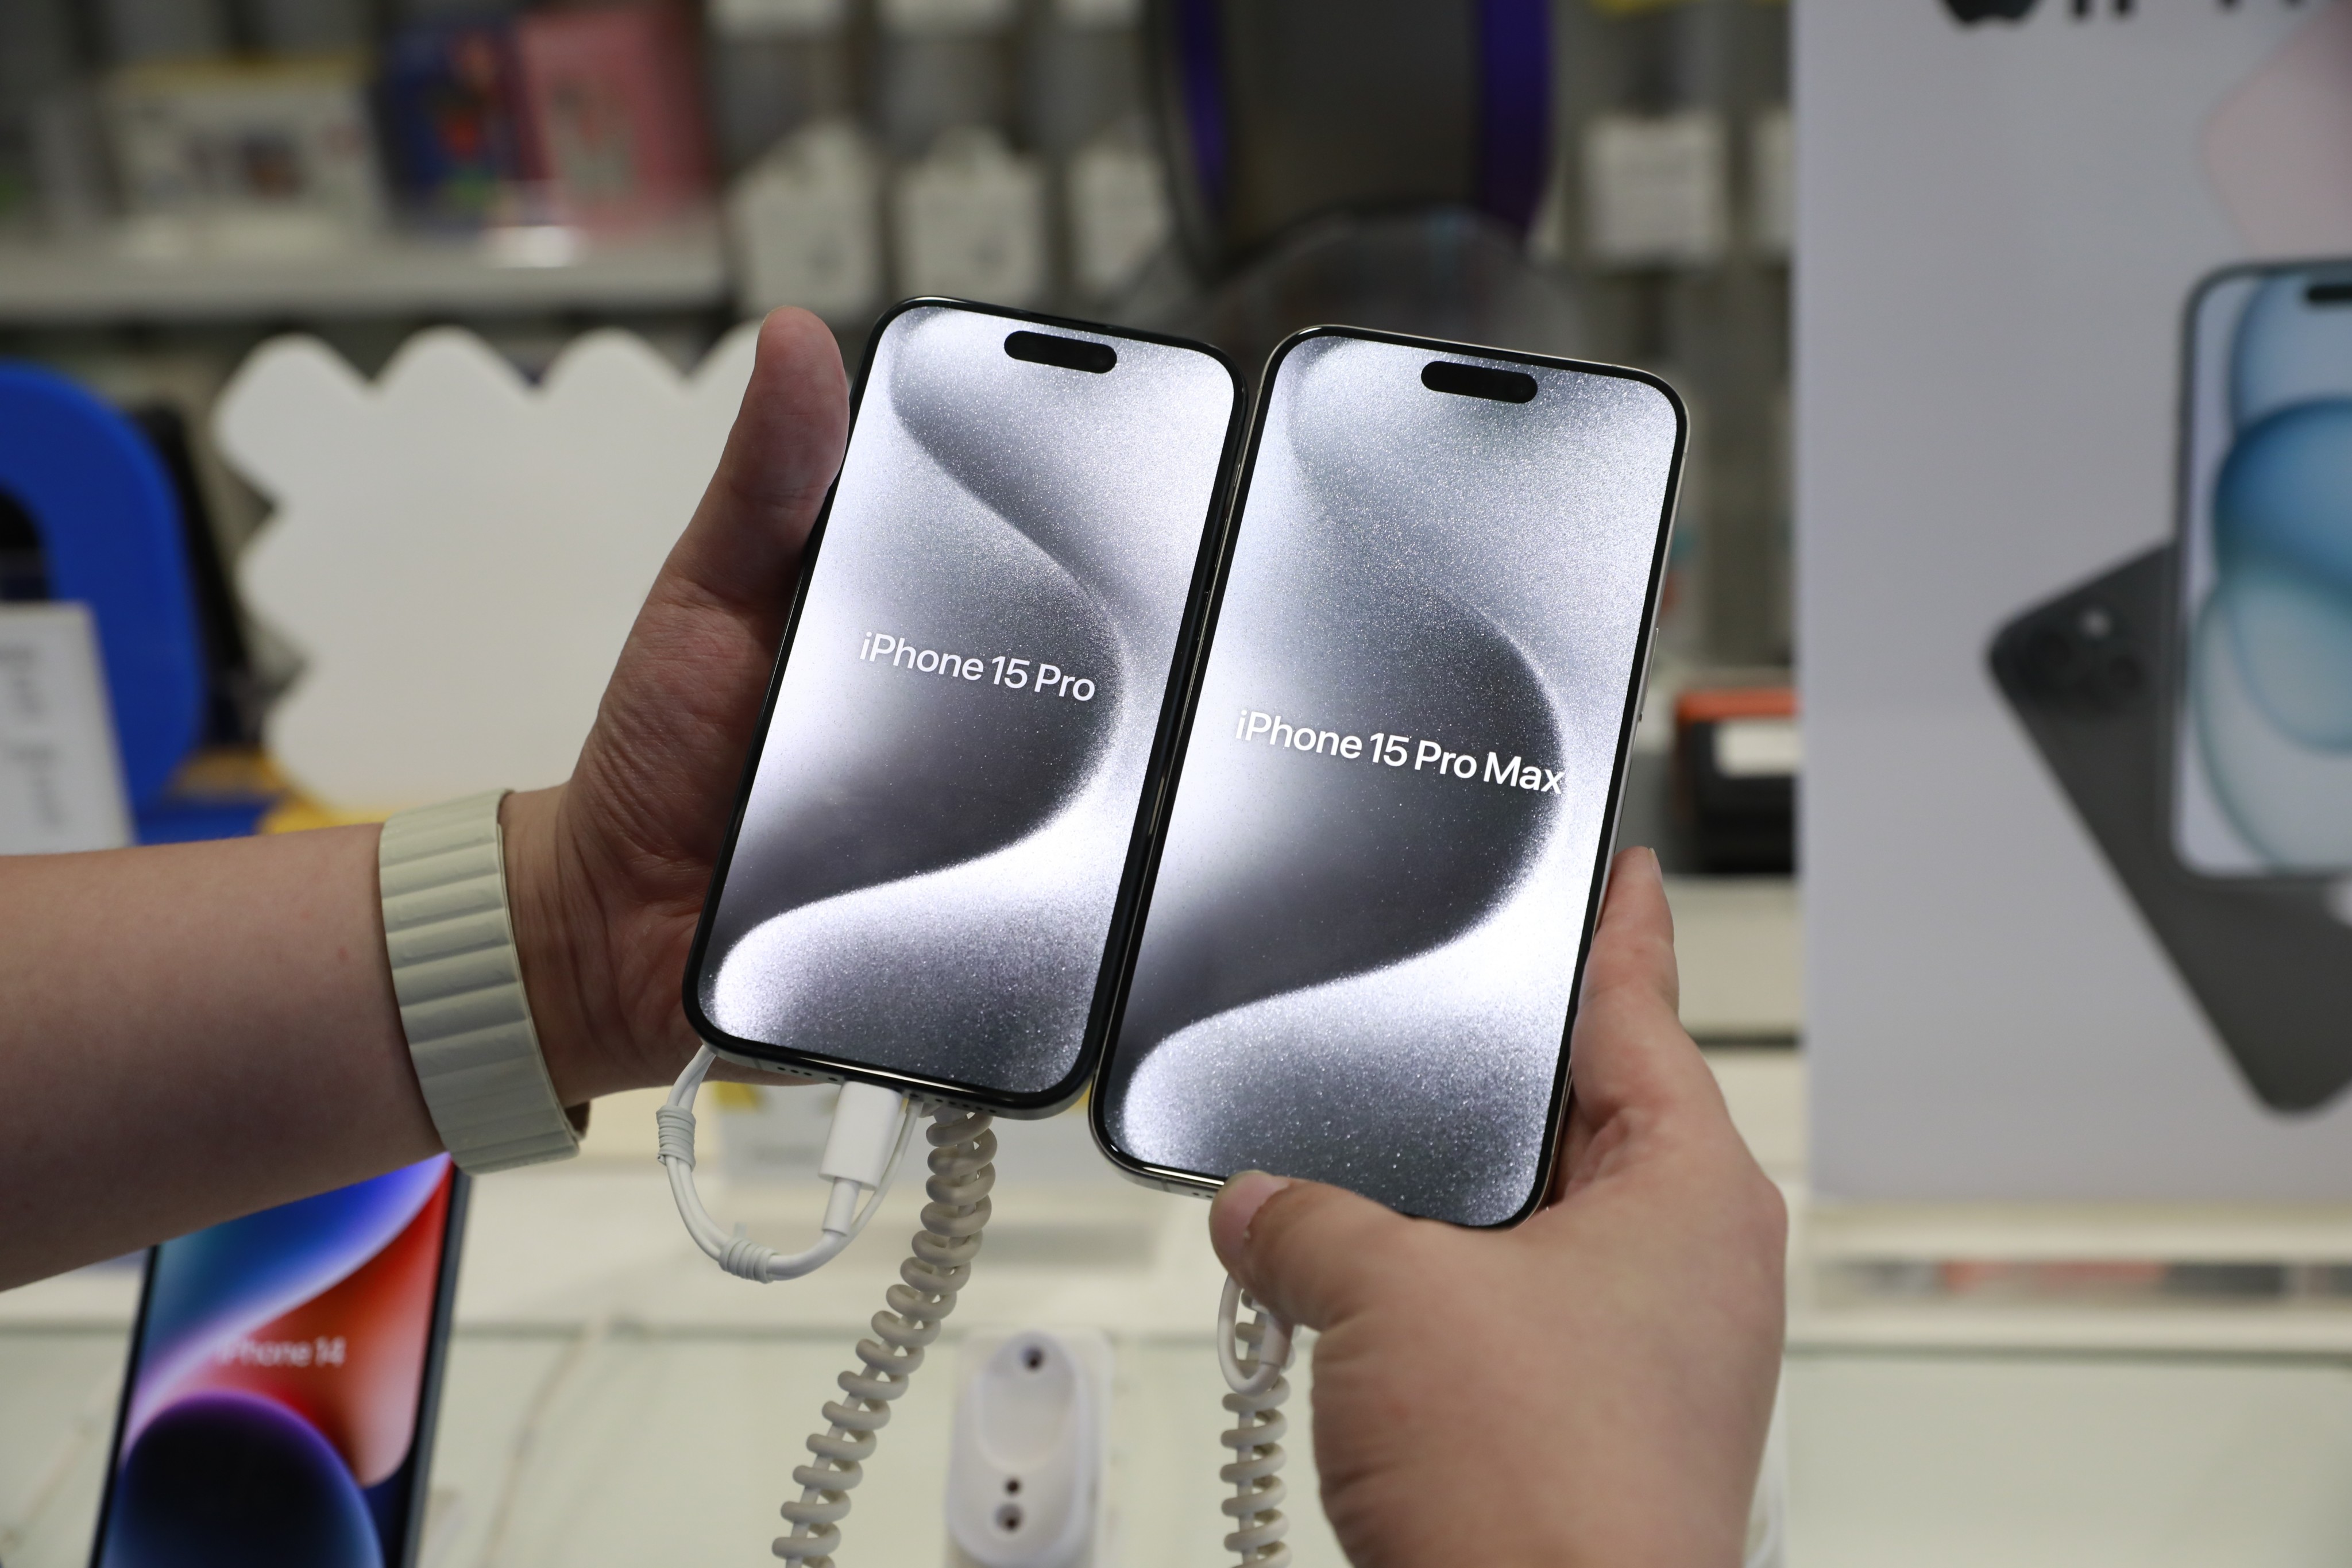 Apple’s iPhone 15 Pro and Pro Max models are seen on display at a store in Xian, capital of northwestern Shaanxi province, on September 22, 2023. Photo: Shutterstock